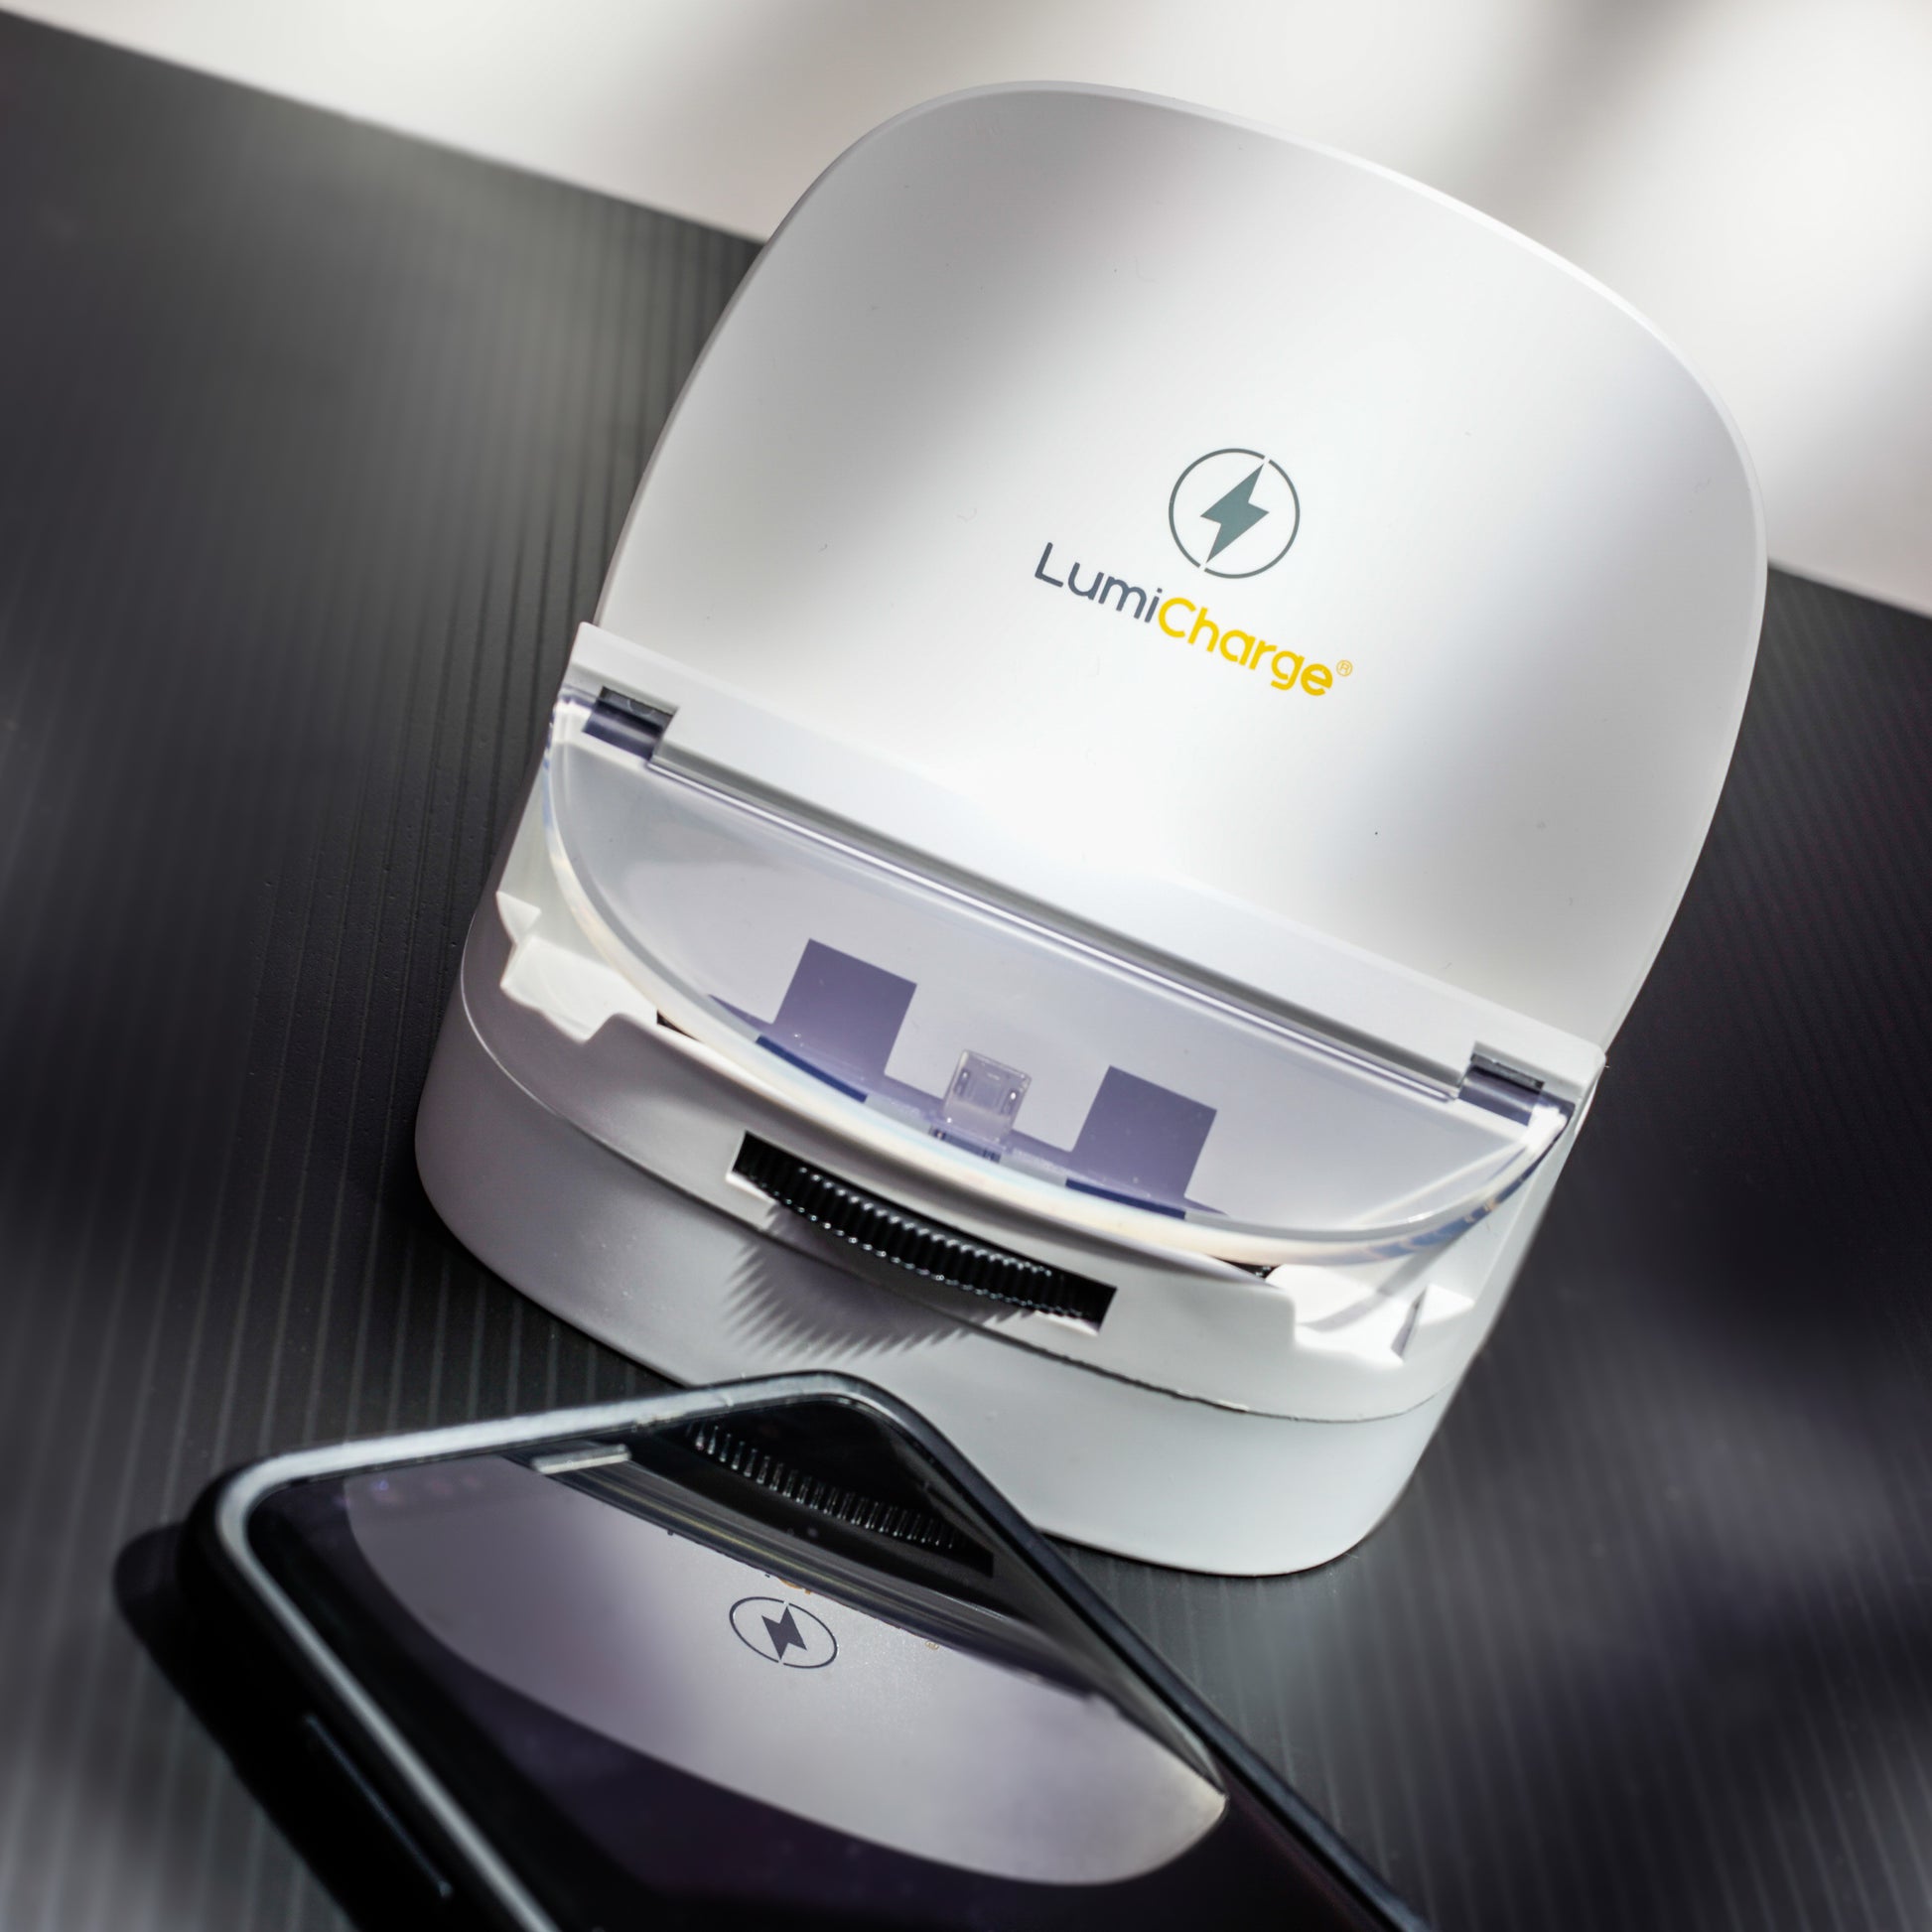 Lumicharge-UD wireless dock charger 